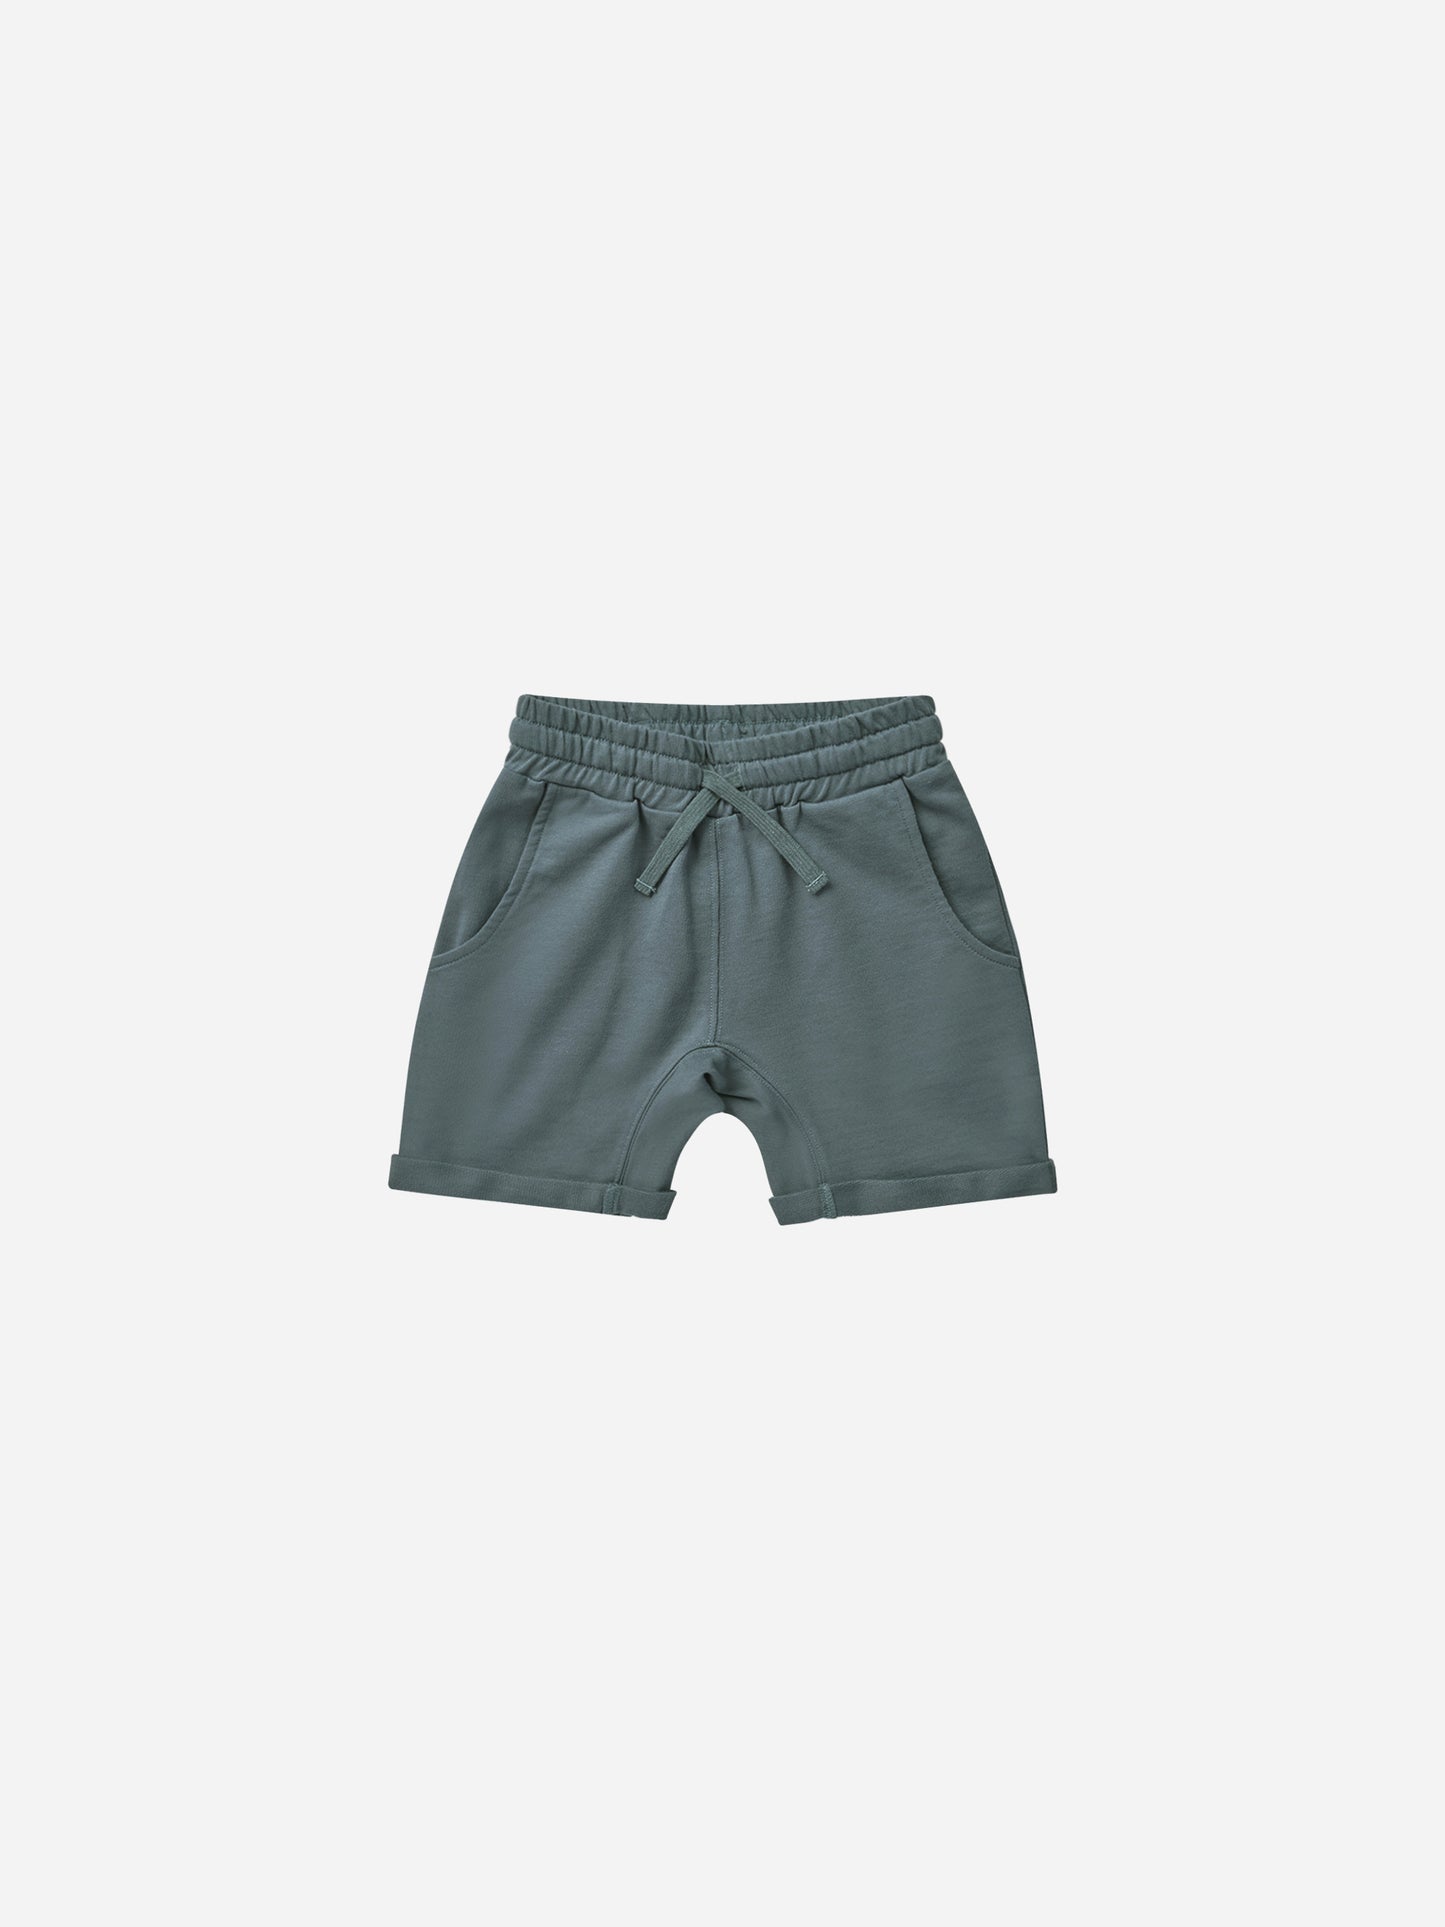 Relaxed Short || Indigo - Rylee + Cru | Kids Clothes | Trendy Baby Clothes | Modern Infant Outfits |